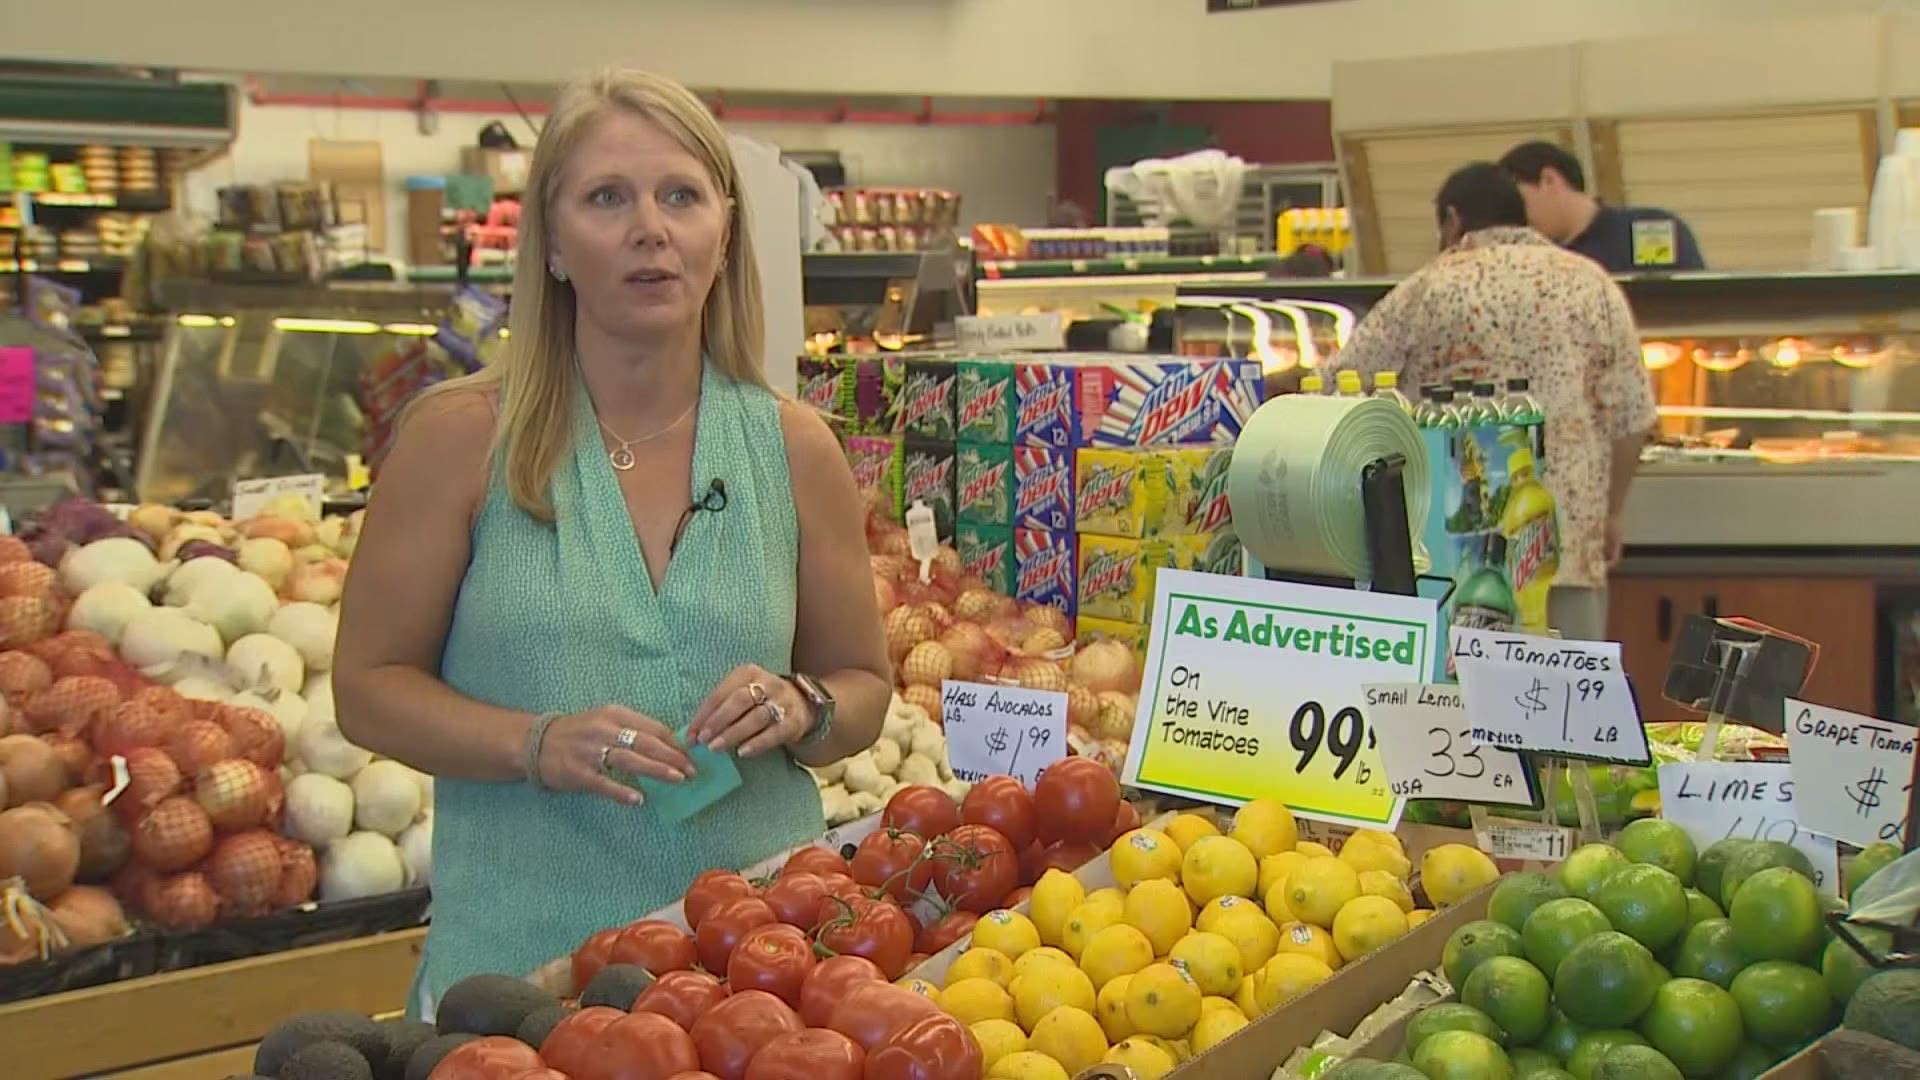 International Marketplace owner Ali Hayton told KING 5 she will close the only grocery store in Point Roberts after the extension of the US-Canada border closure.